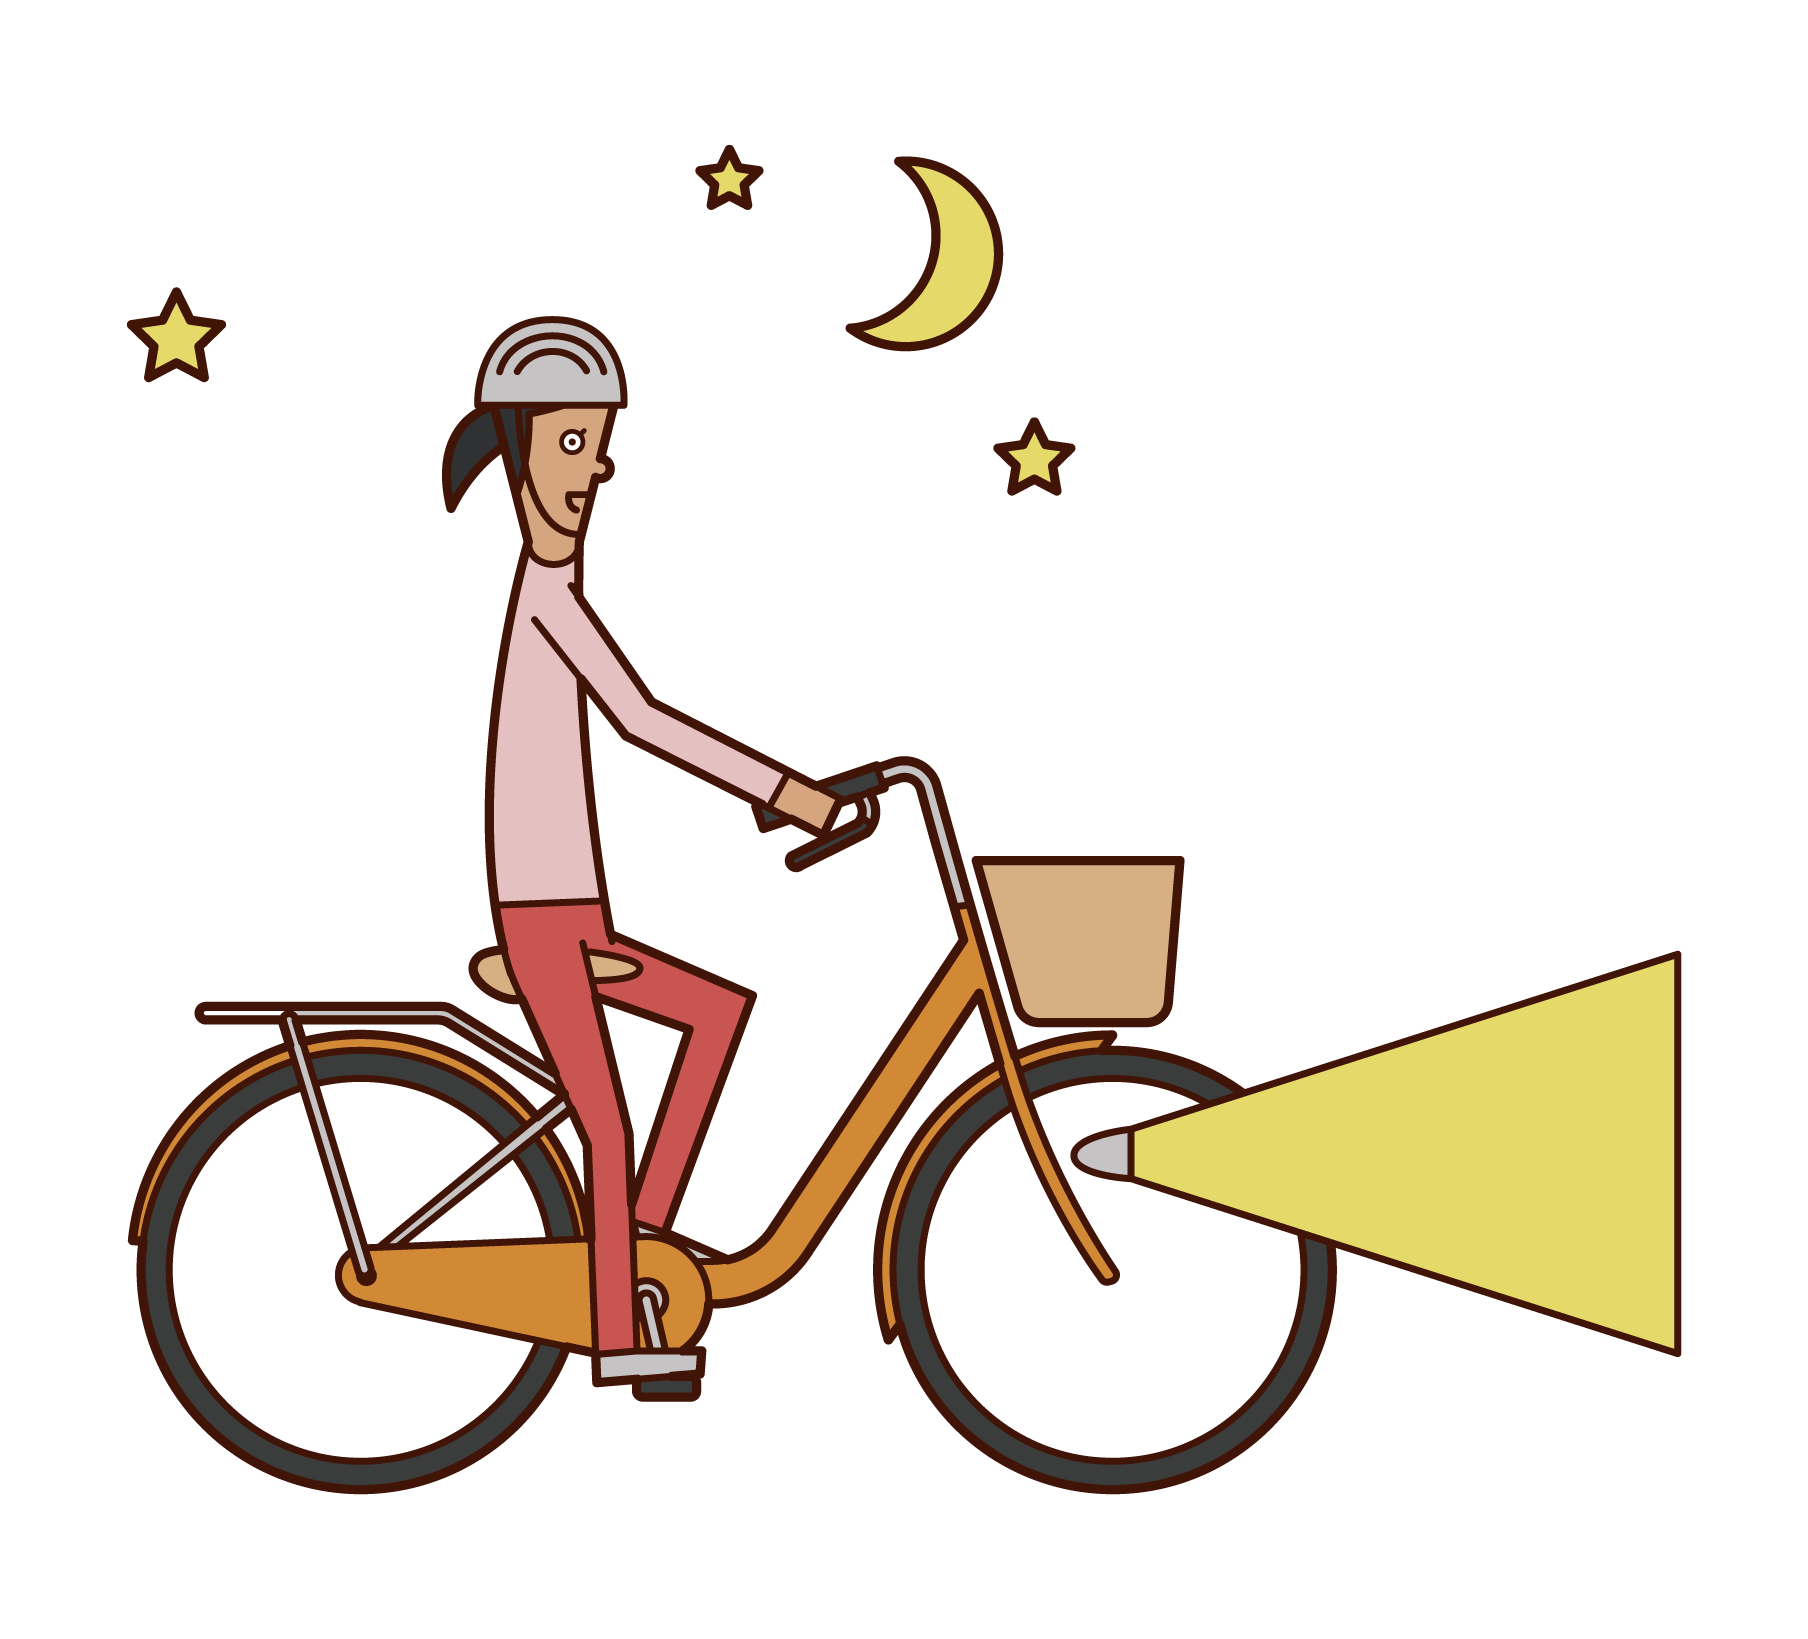 Illustration of a woman riding a bicycle with a light on it